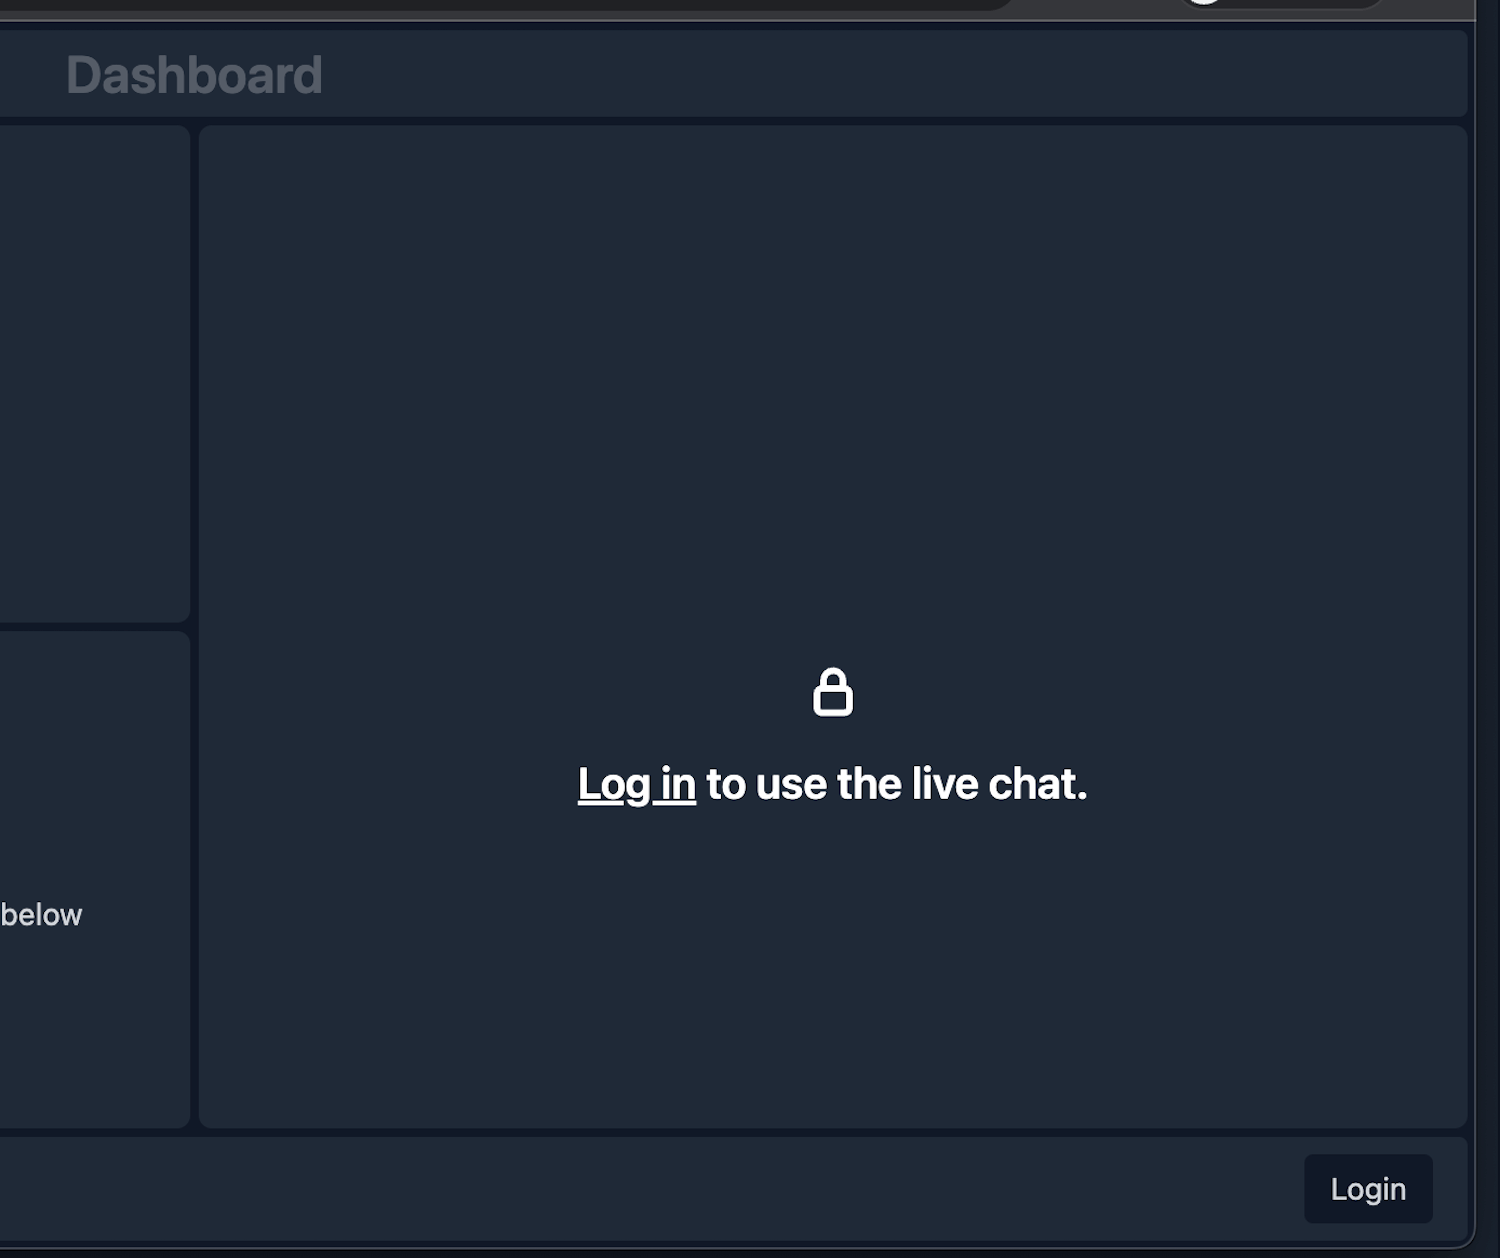 Viewers will be prompted to log in to chat